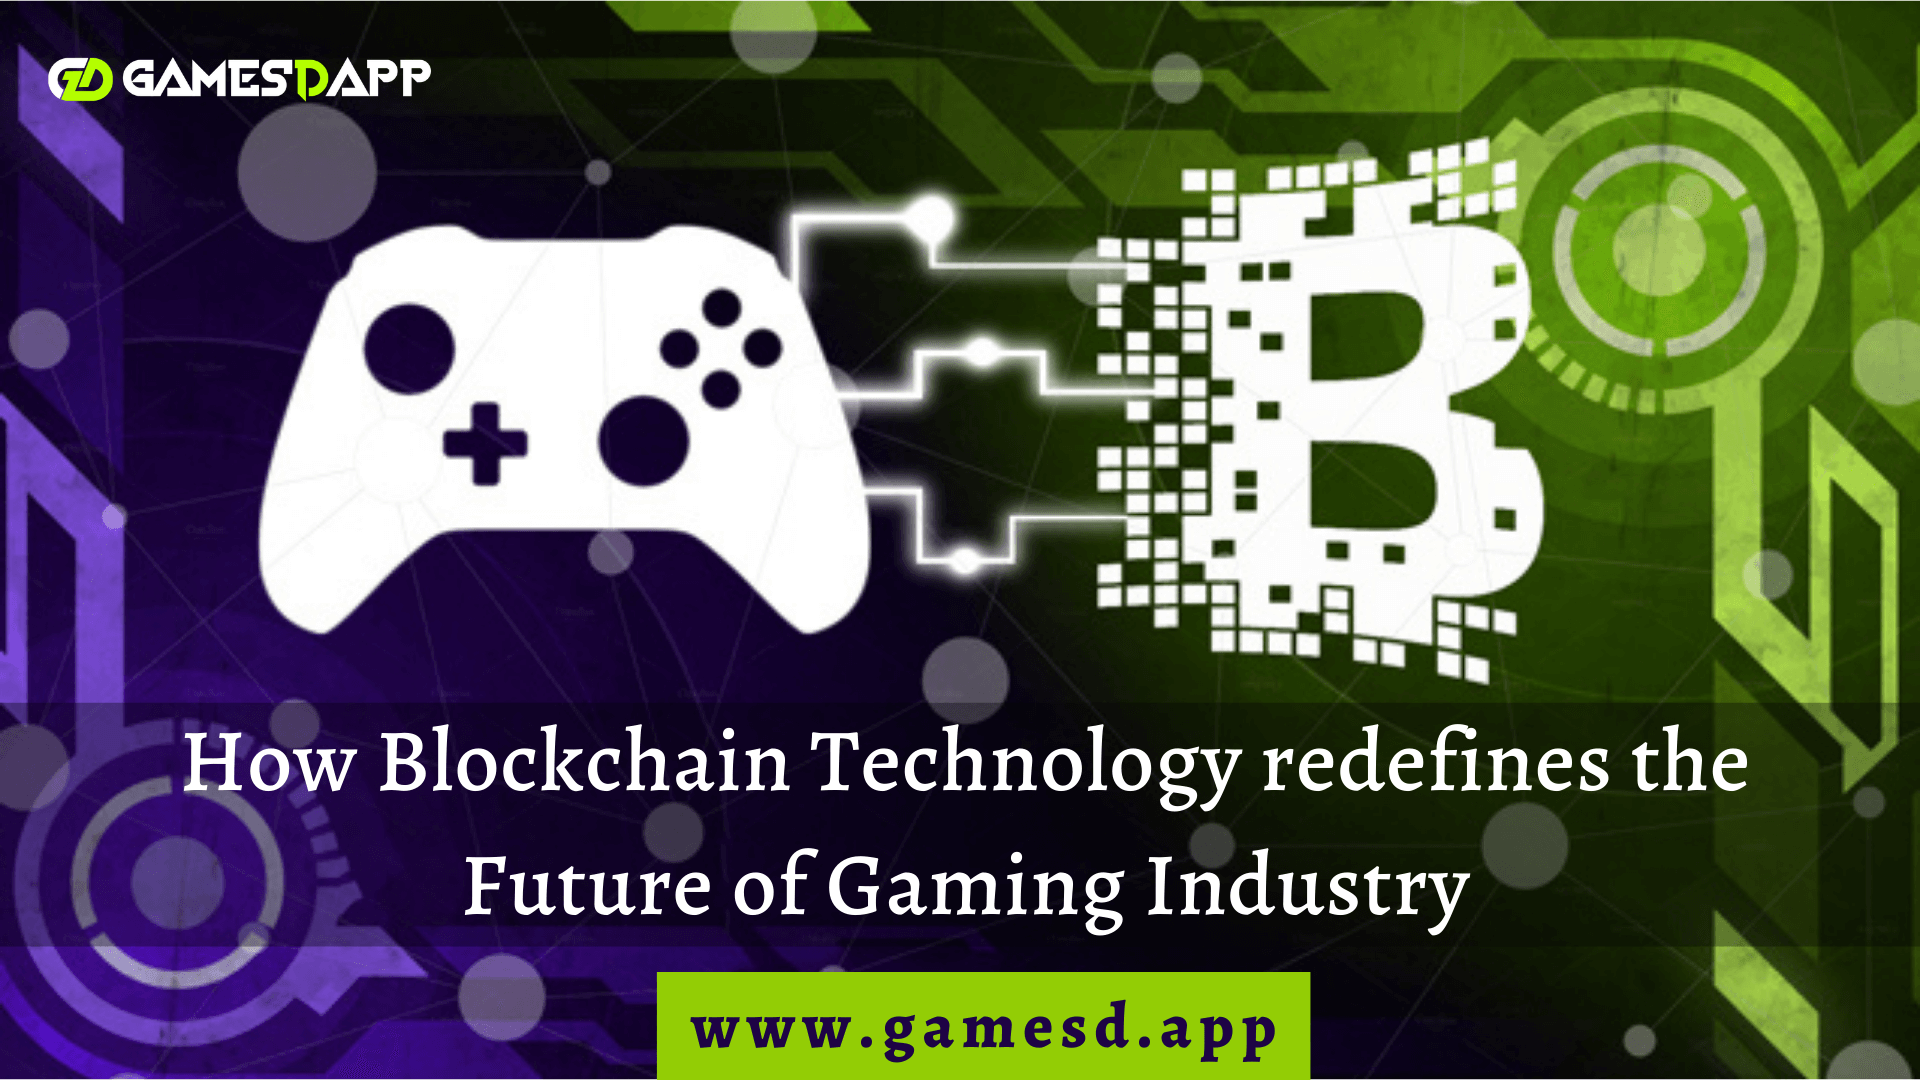 How will Blockchain Technology Redefine the Future of Gaming?